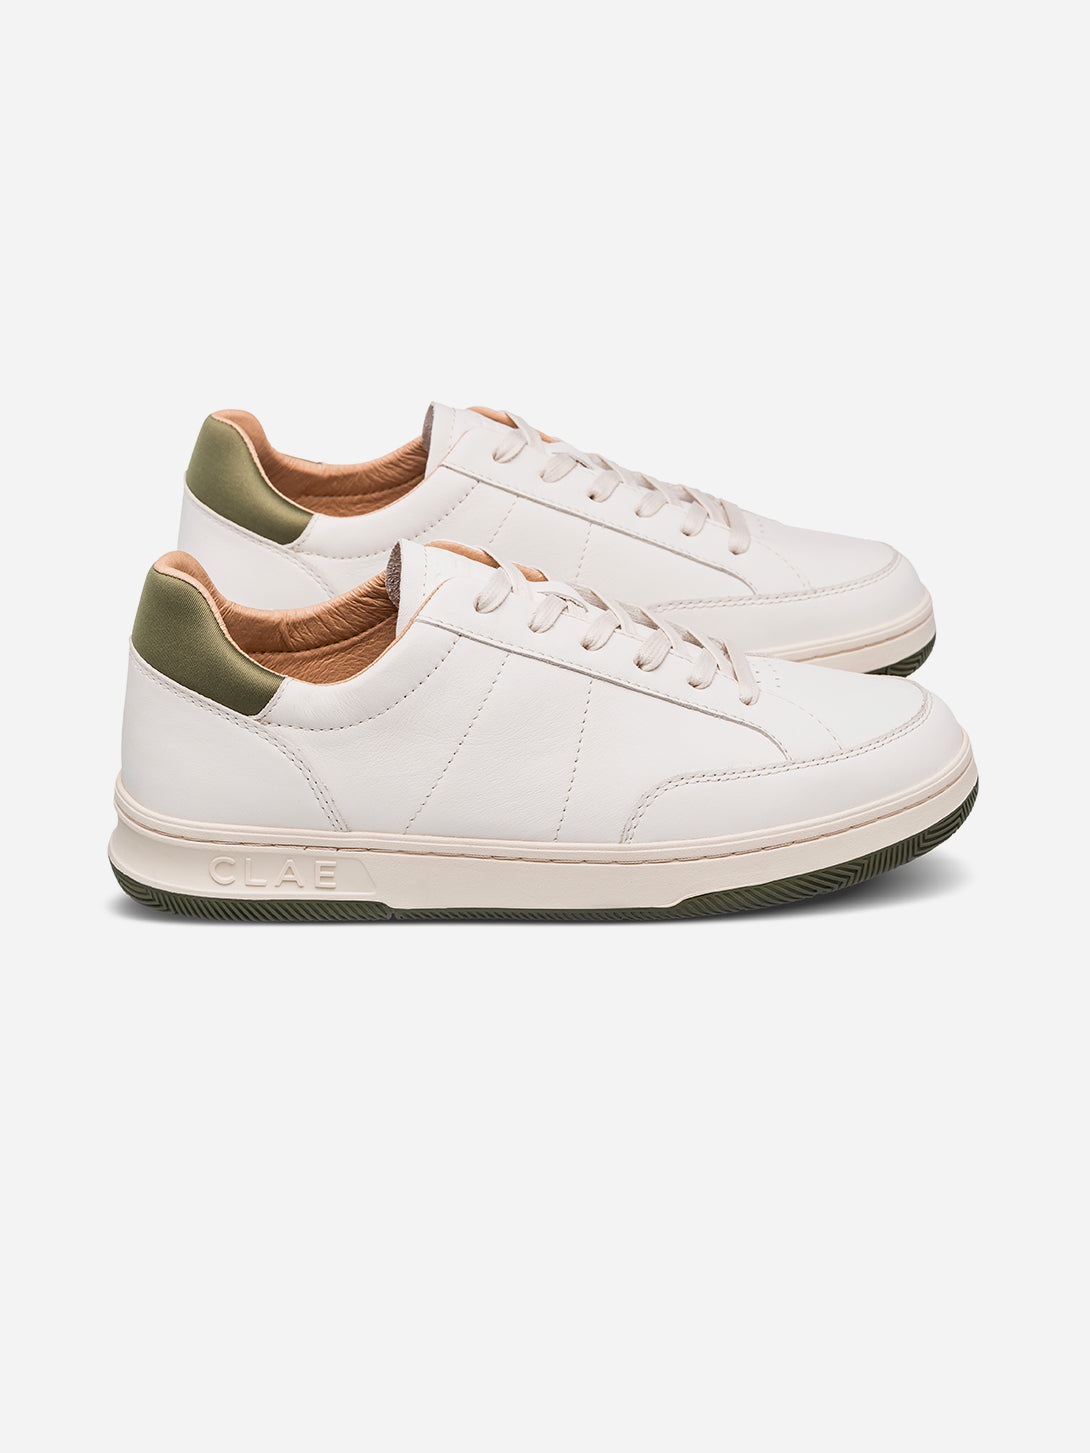 Off White Leather Olive Monroe Clae Tennis Style Shoe